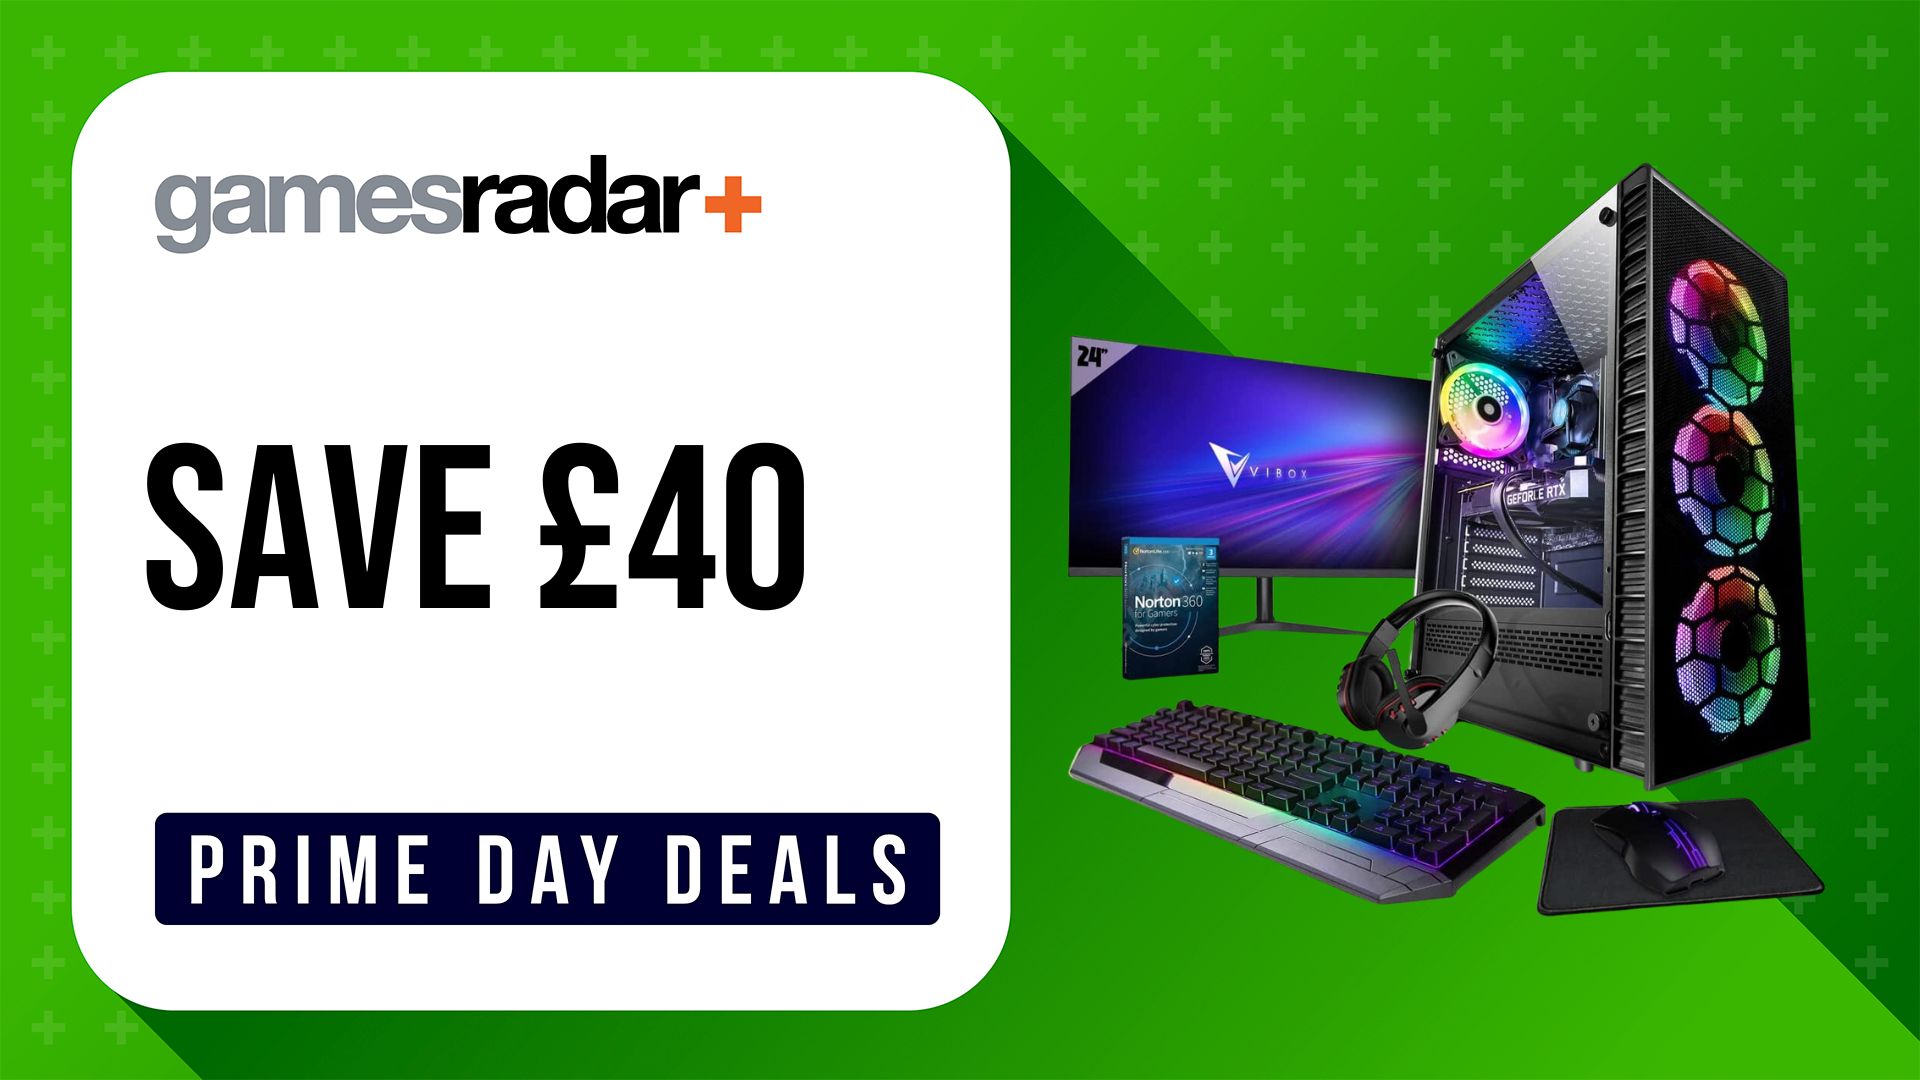 Vibox II-96 prime day gaming pc deal with green background and £40 saving